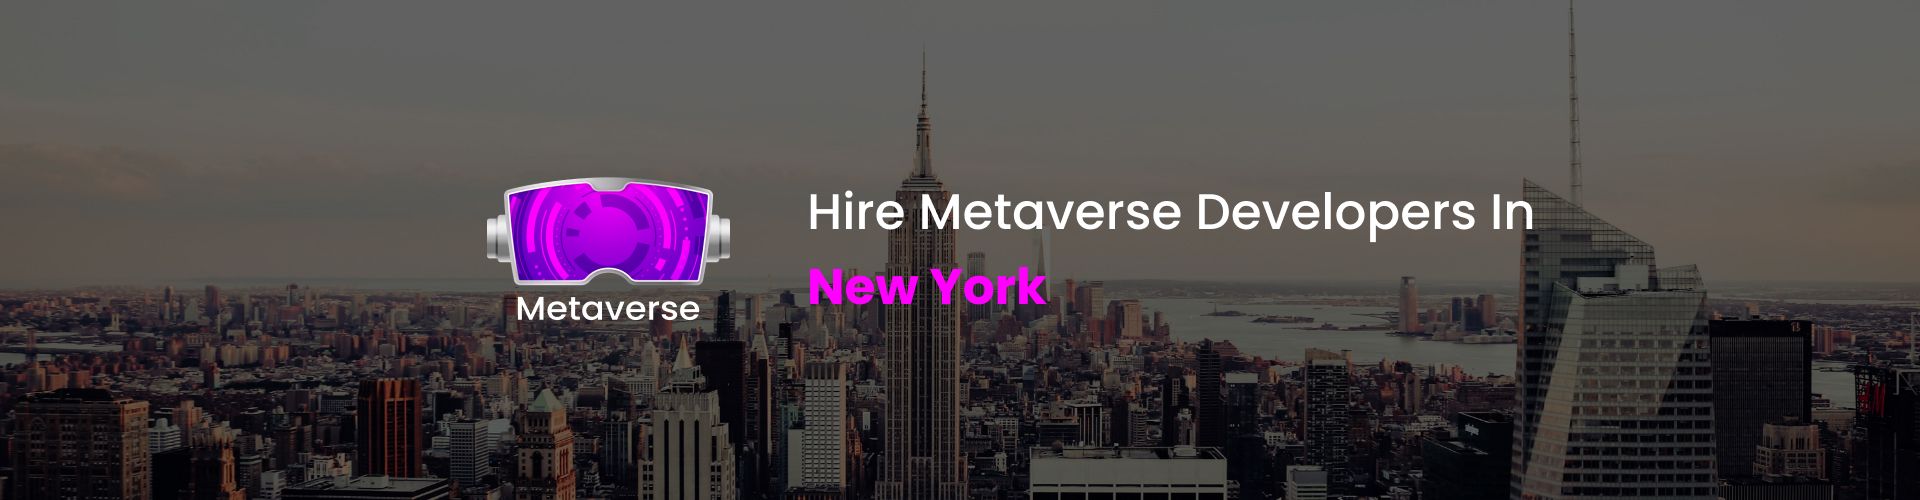 hire metaverse developers in new york